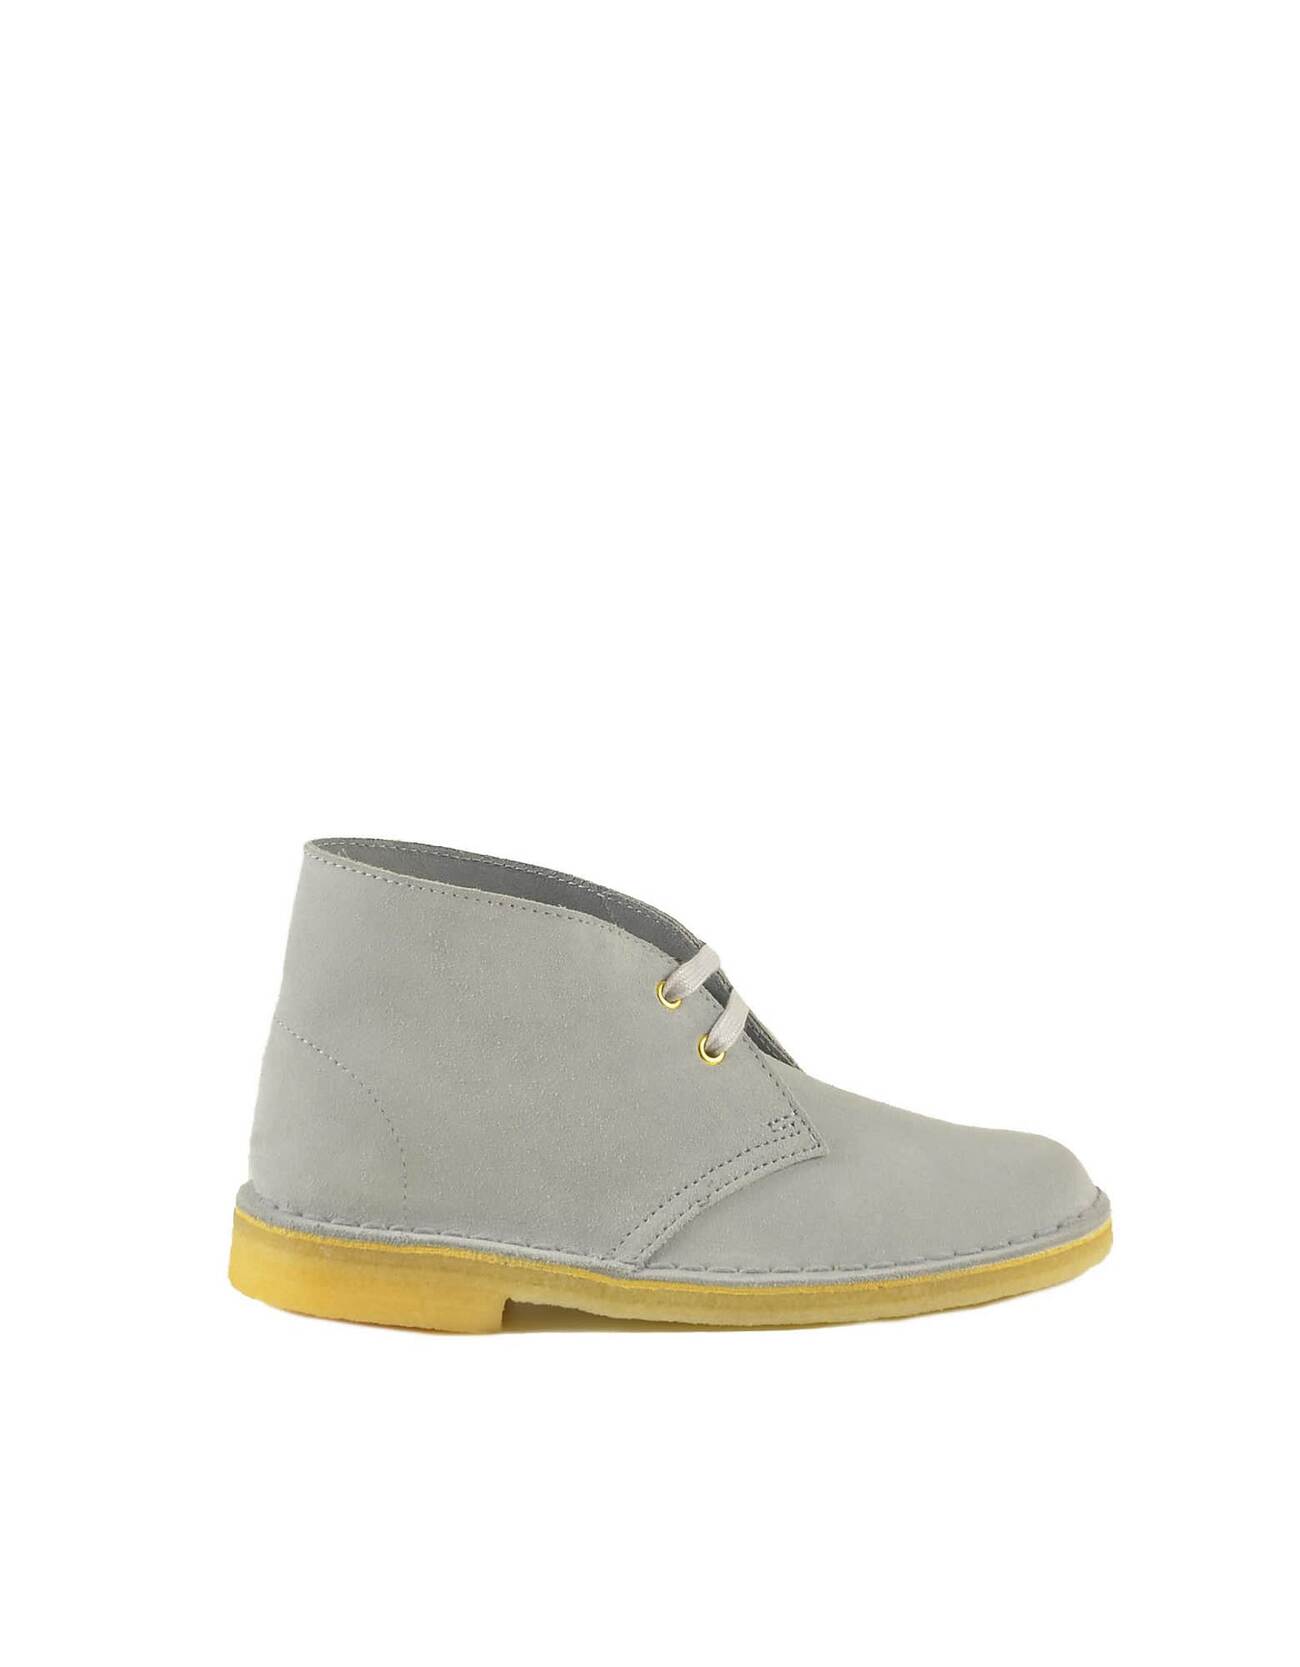 Clarks Womens Gray Shoes